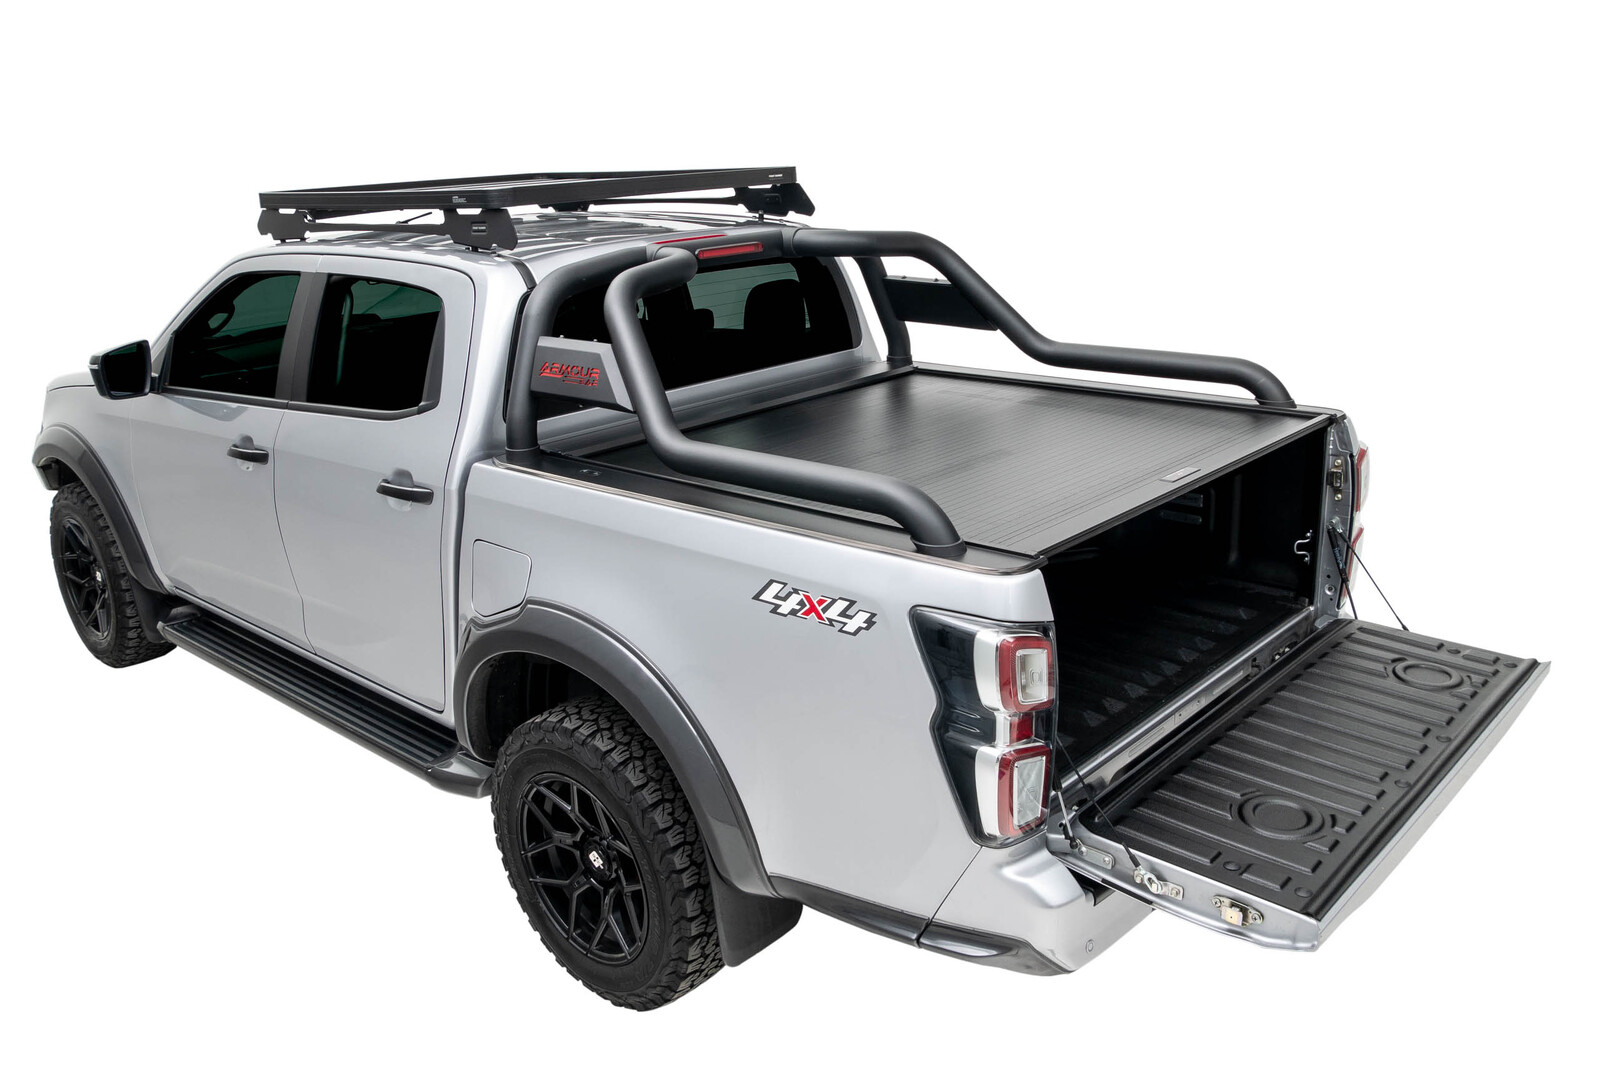 HSP Armour Bar (Black) To Suit Isuzu D-Max Gen 3 (MY2021+) & Mazda BT50 TF (2020+) (Dual Cab Models Only)